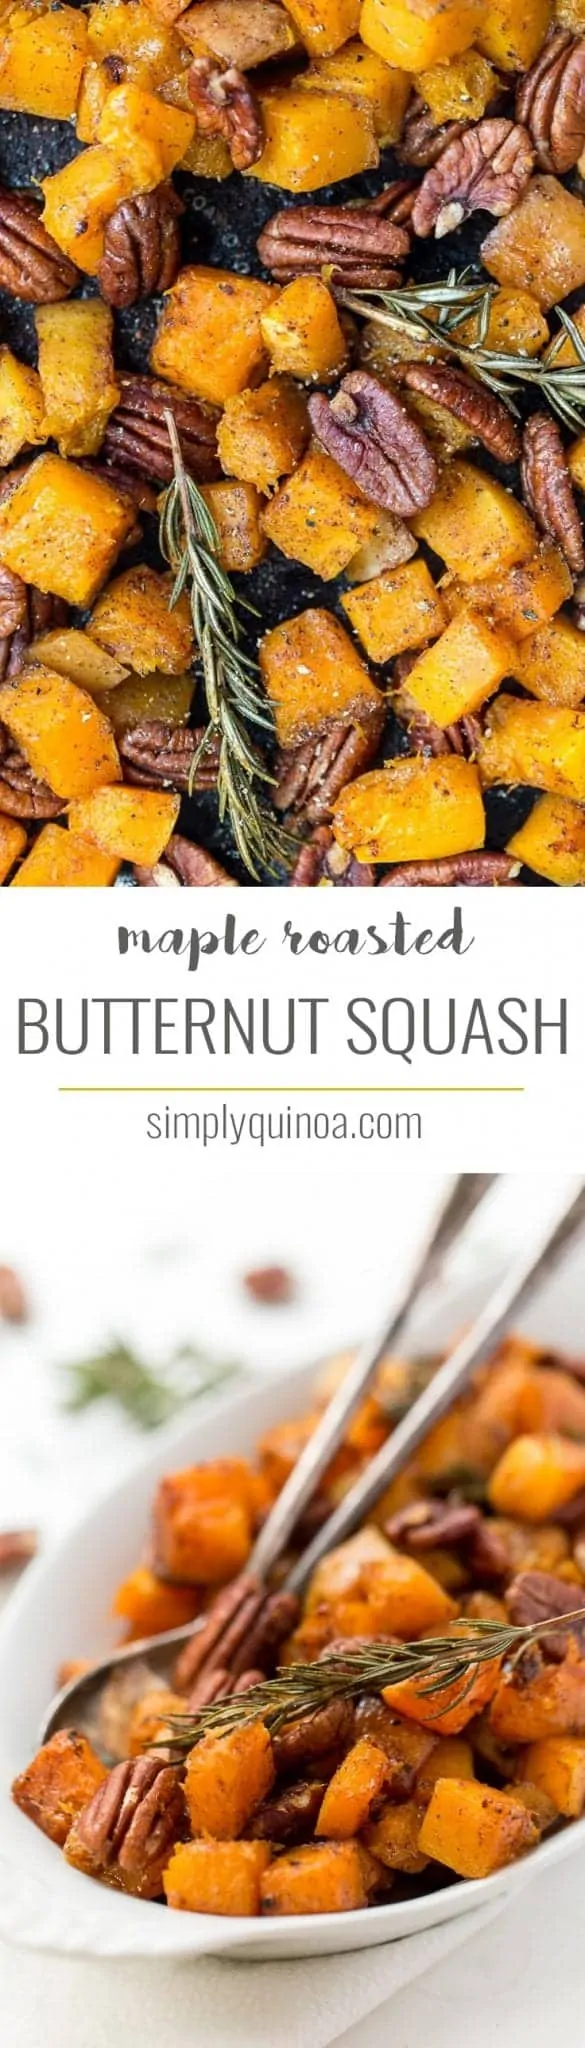 This MAPLE ROASTED Butternut Squash recipe is the perfect holiday side dish! Uses just 7 ingredients, requires only one bowl and 40 minutes to make!